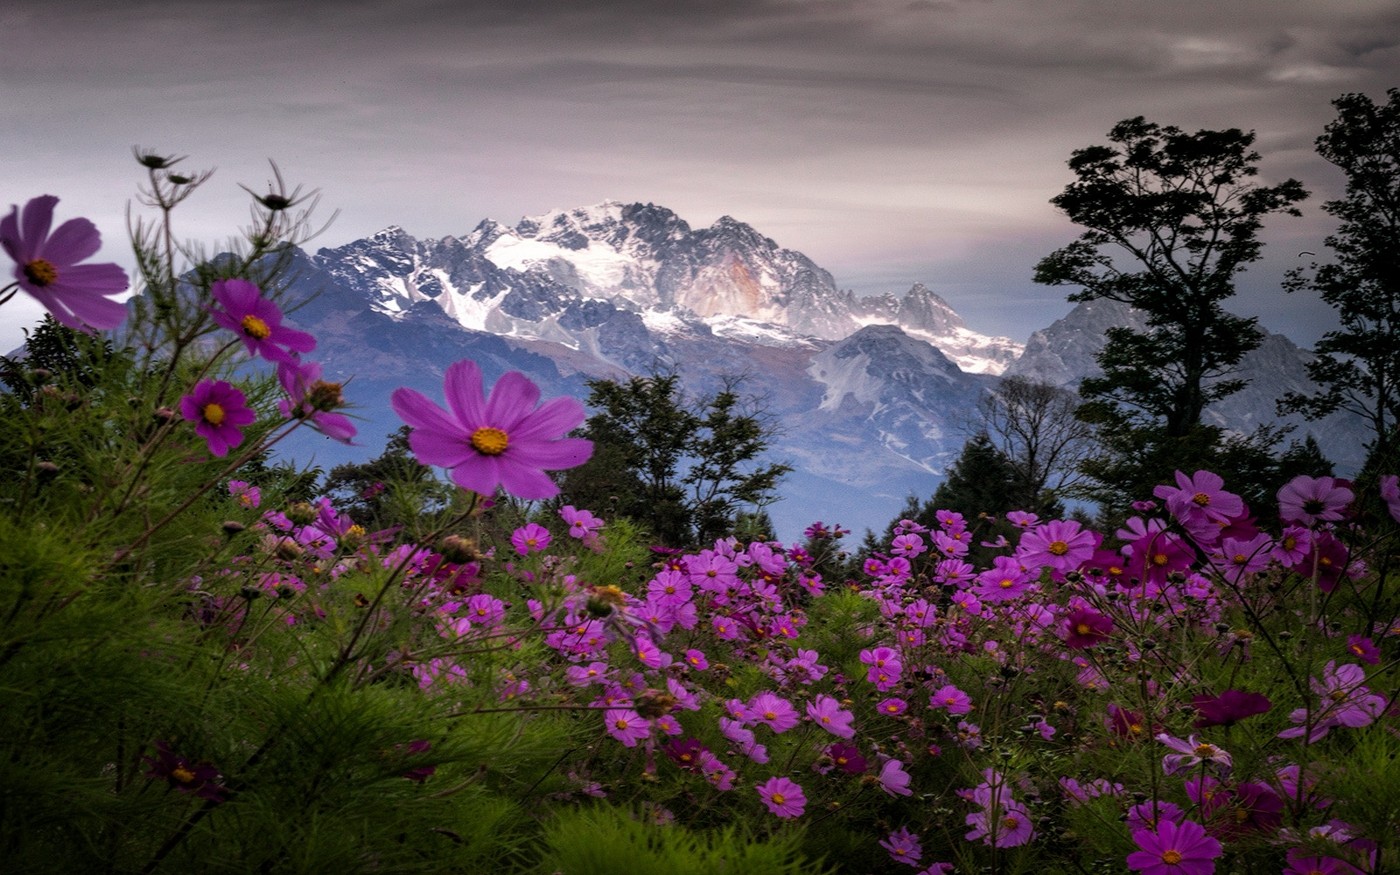 General 1400x875 landscape nature spring mountains wildflowers trees snowy peak shrubs clouds China